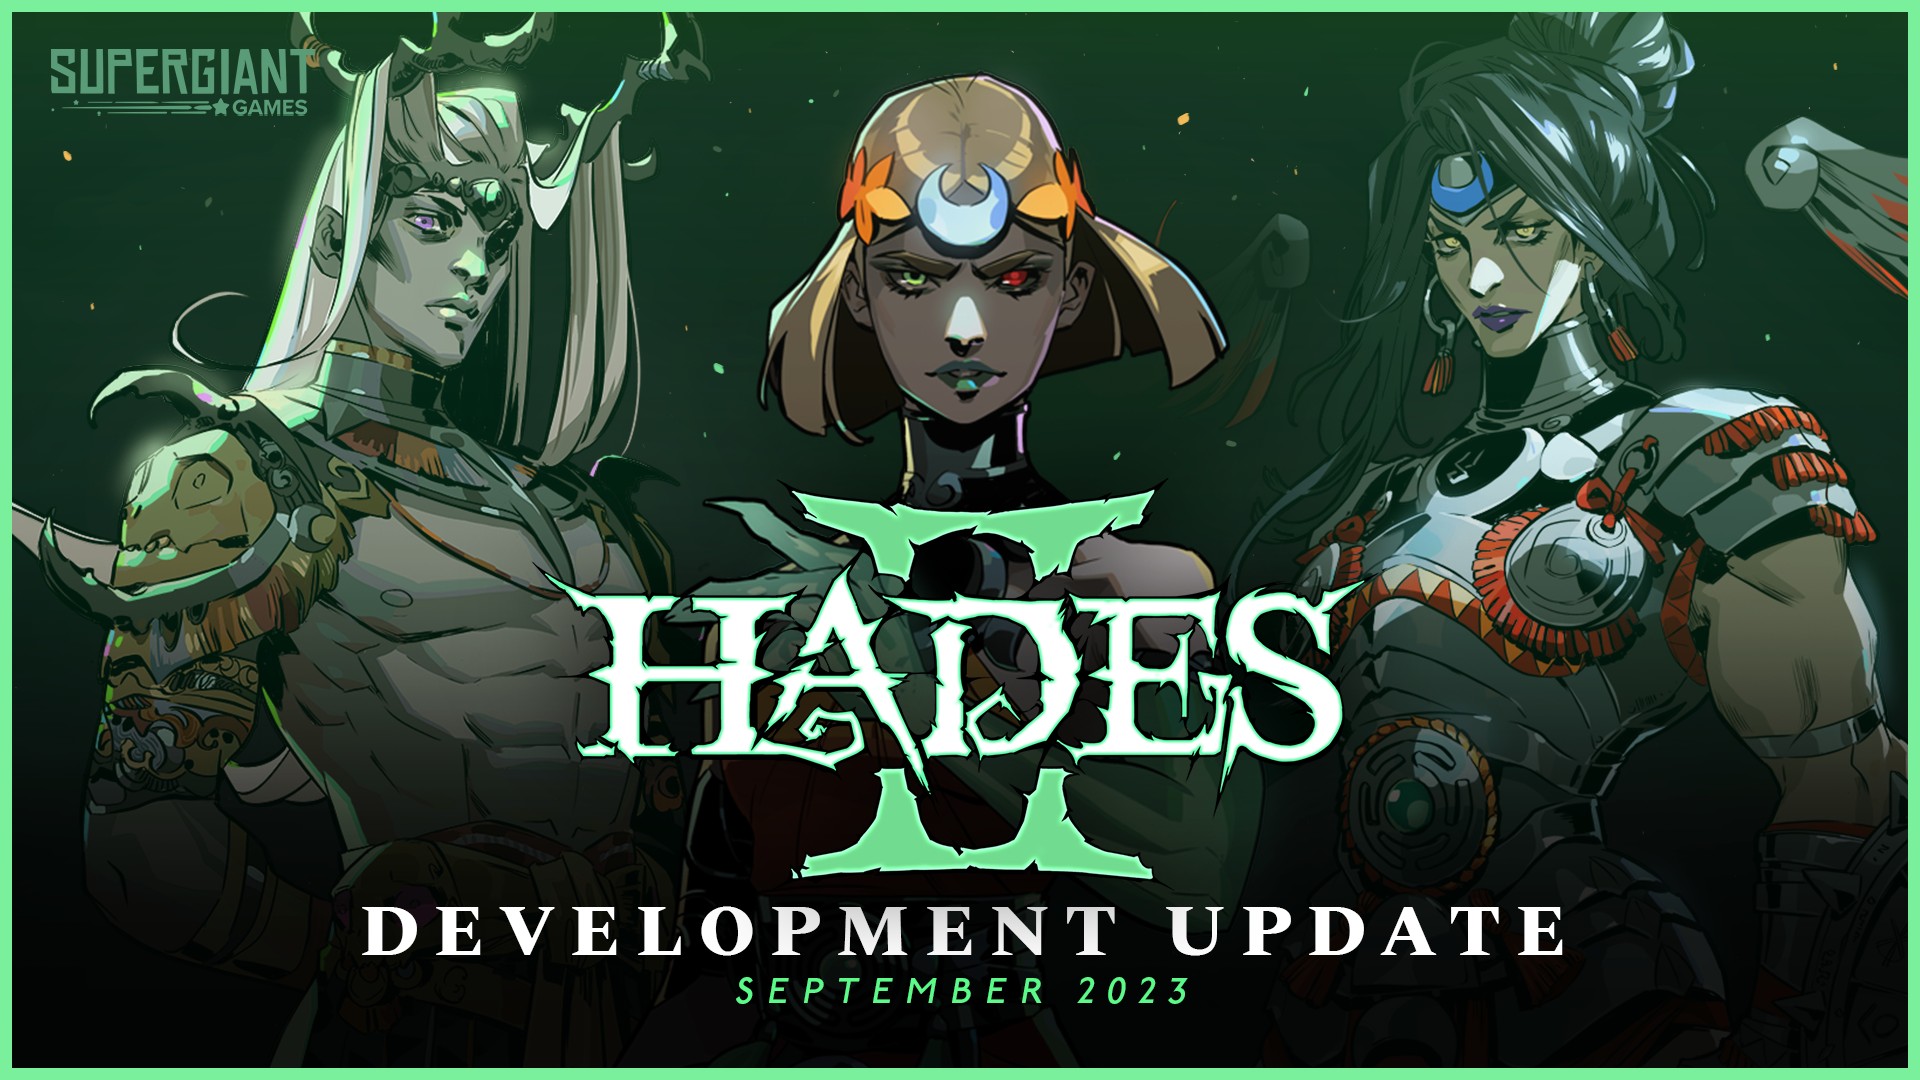 Hades 2 release date estimate, early access window, and trailers